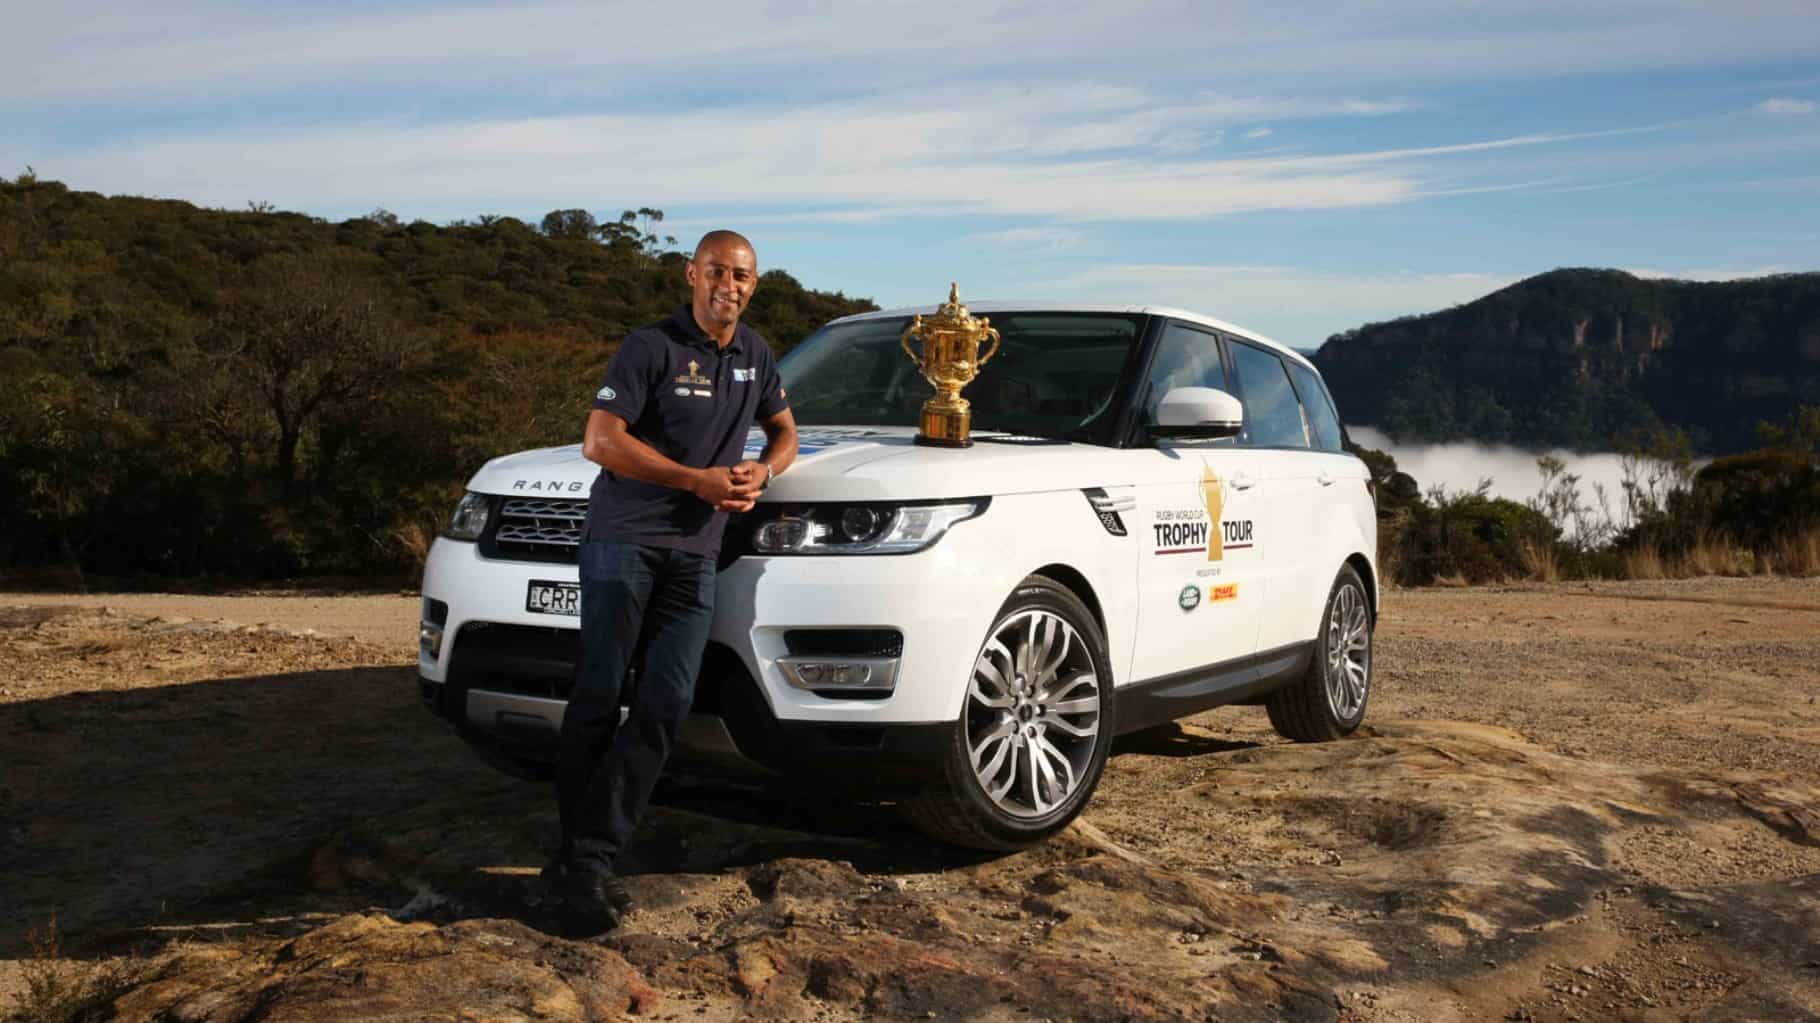 Rugby World Cup: Tour of Australia